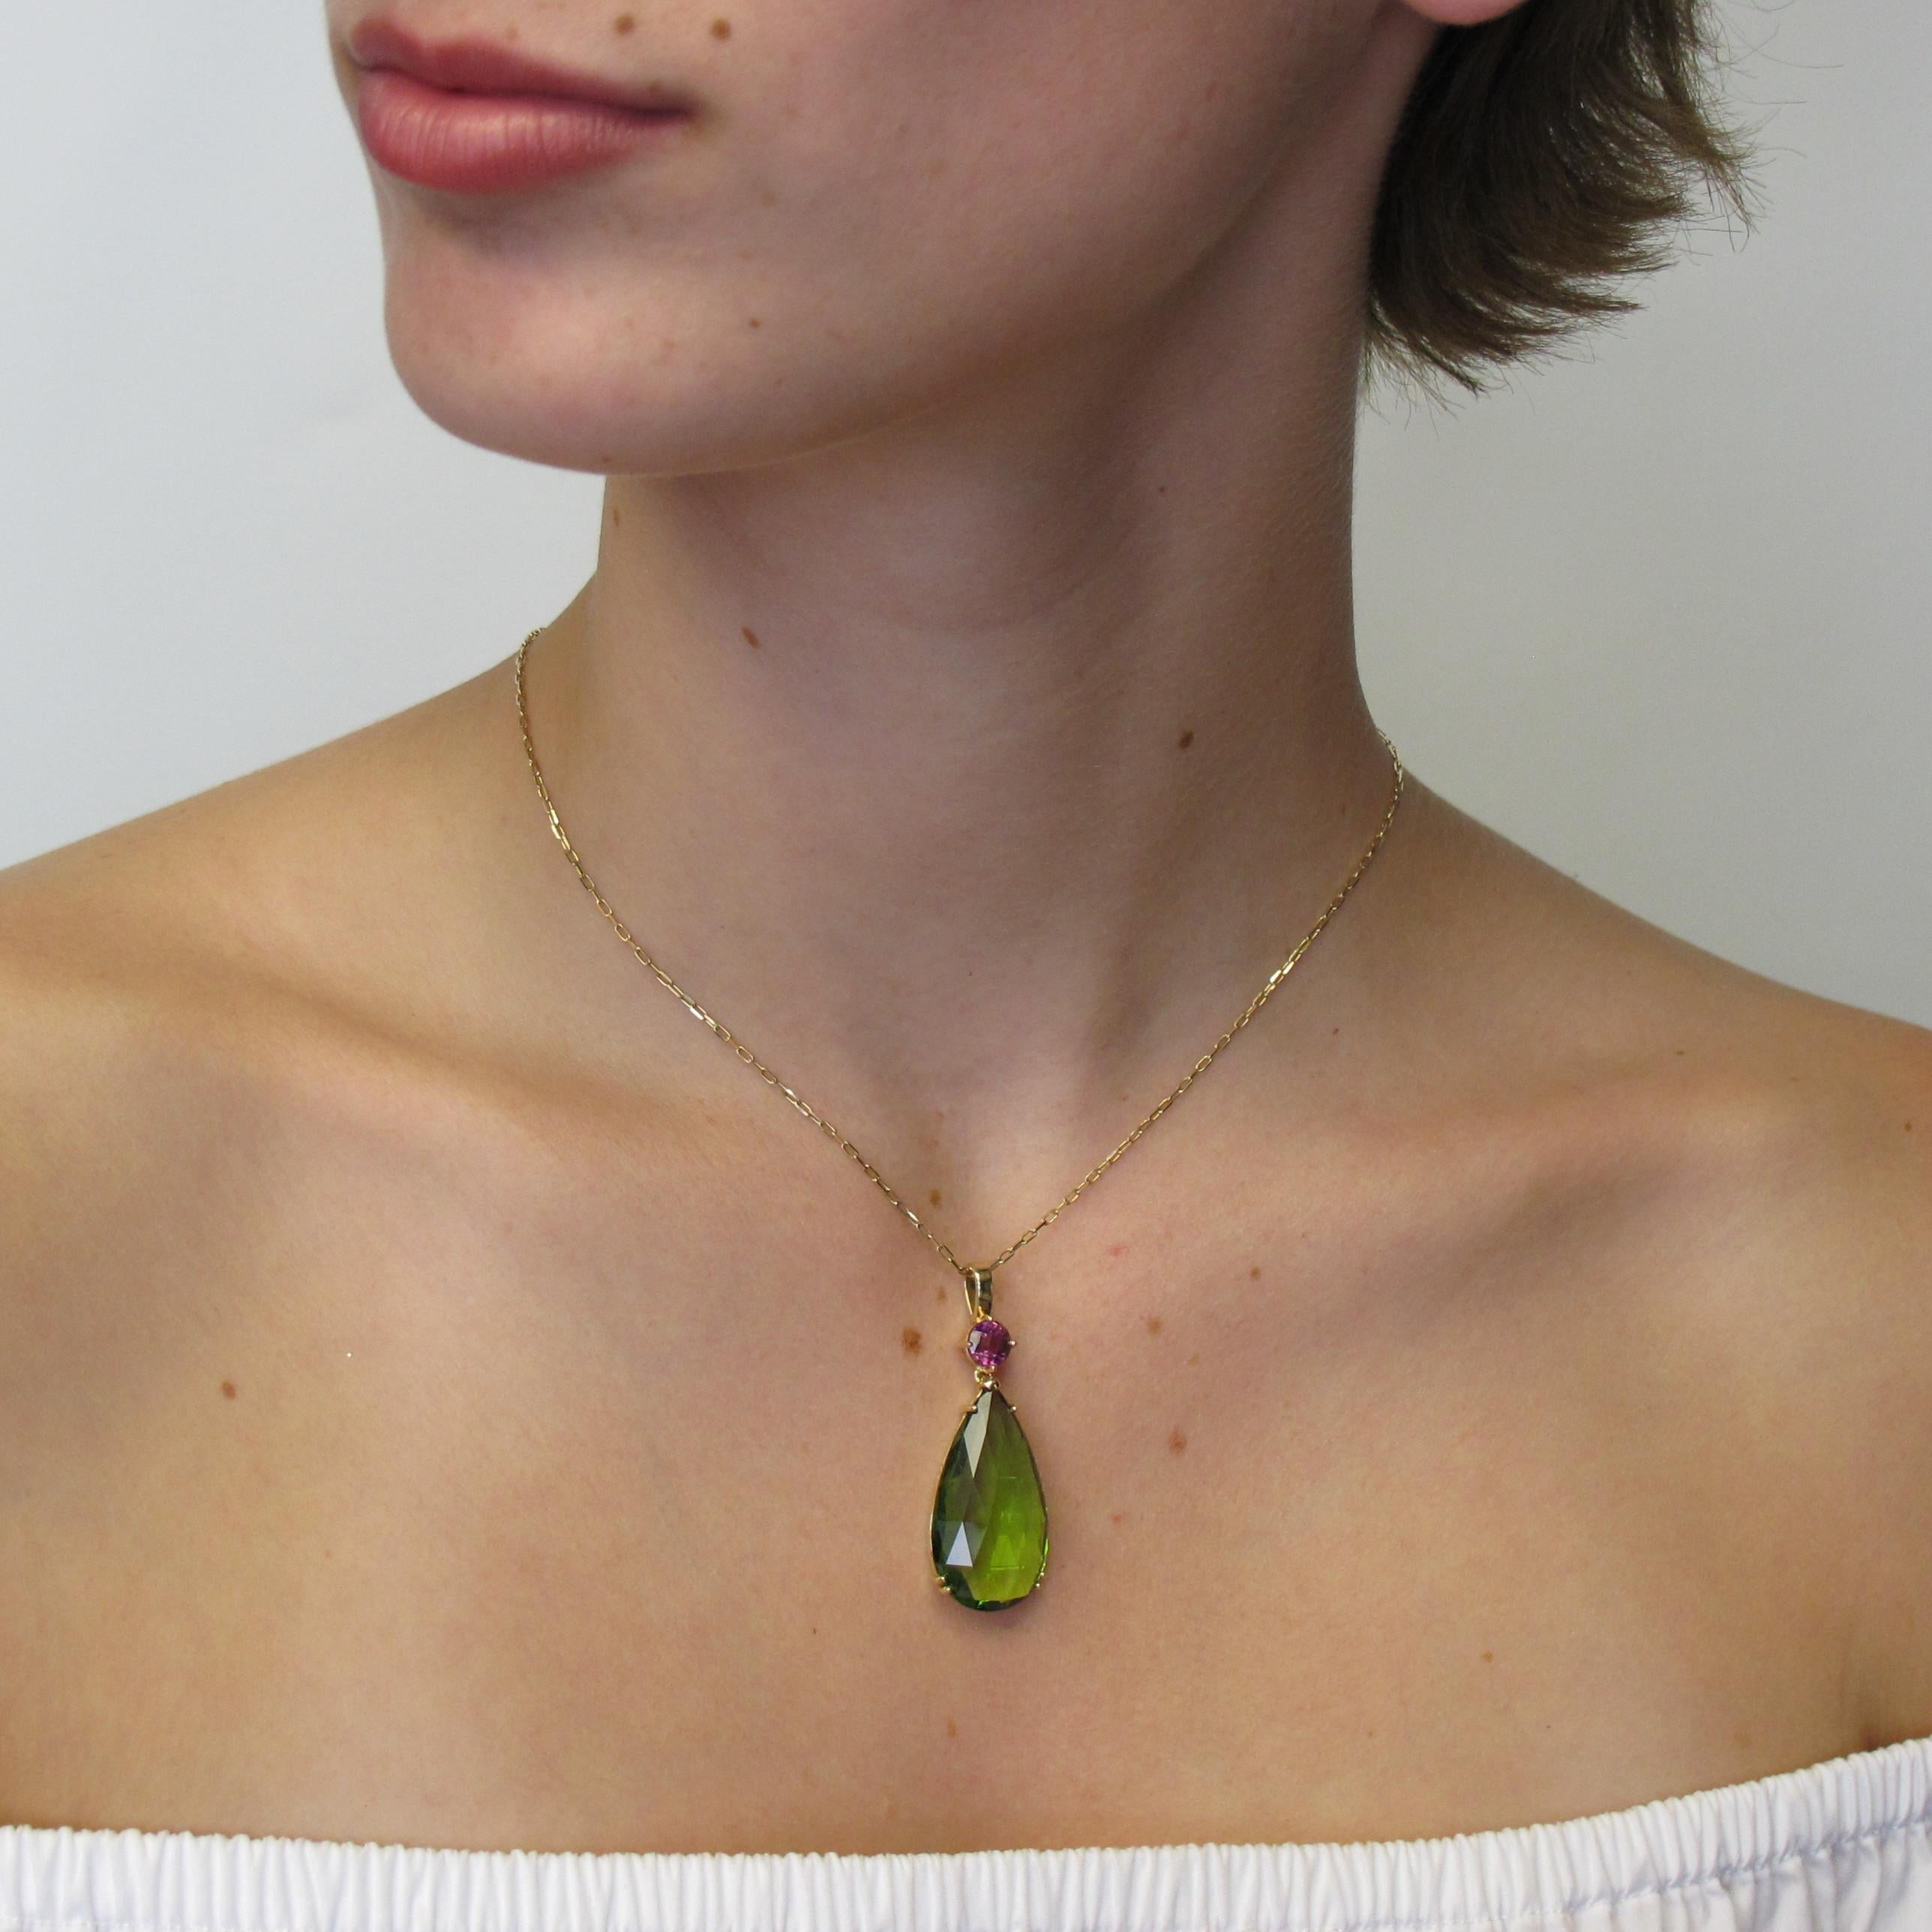 This enchanting pear shaped pendant necklace will turn heads wherever you choose to wear it. A versatile piece that gives you the option to dress it up or down. This pendaloque cut peridot 30x15mm (23.33 carats) pendant is set with 1 round mulberry